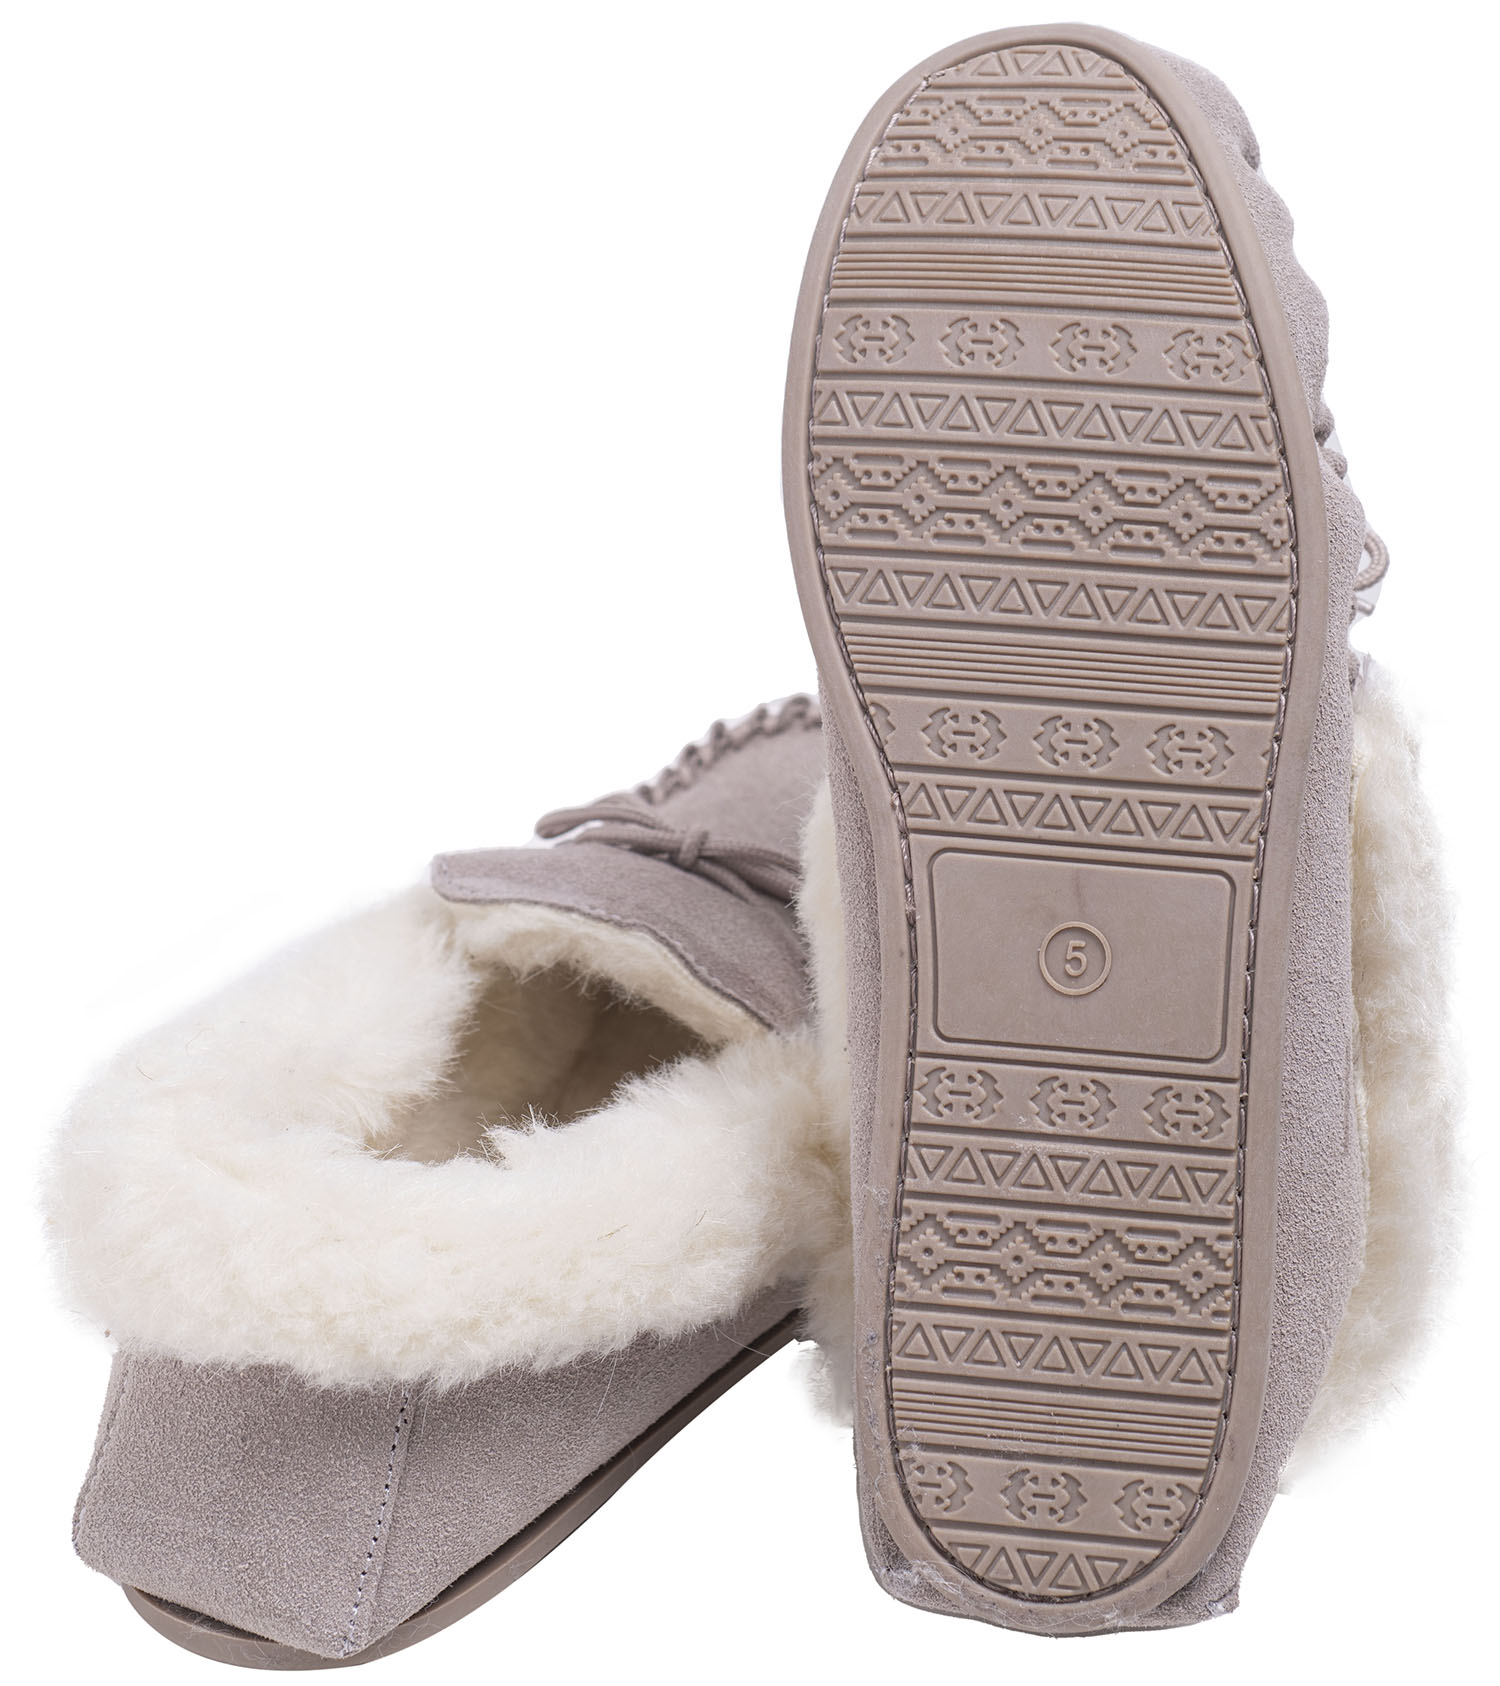 Ladies Sheepskin Moccasin Slippers Real Suede Wool Lining Hard Rubber ...